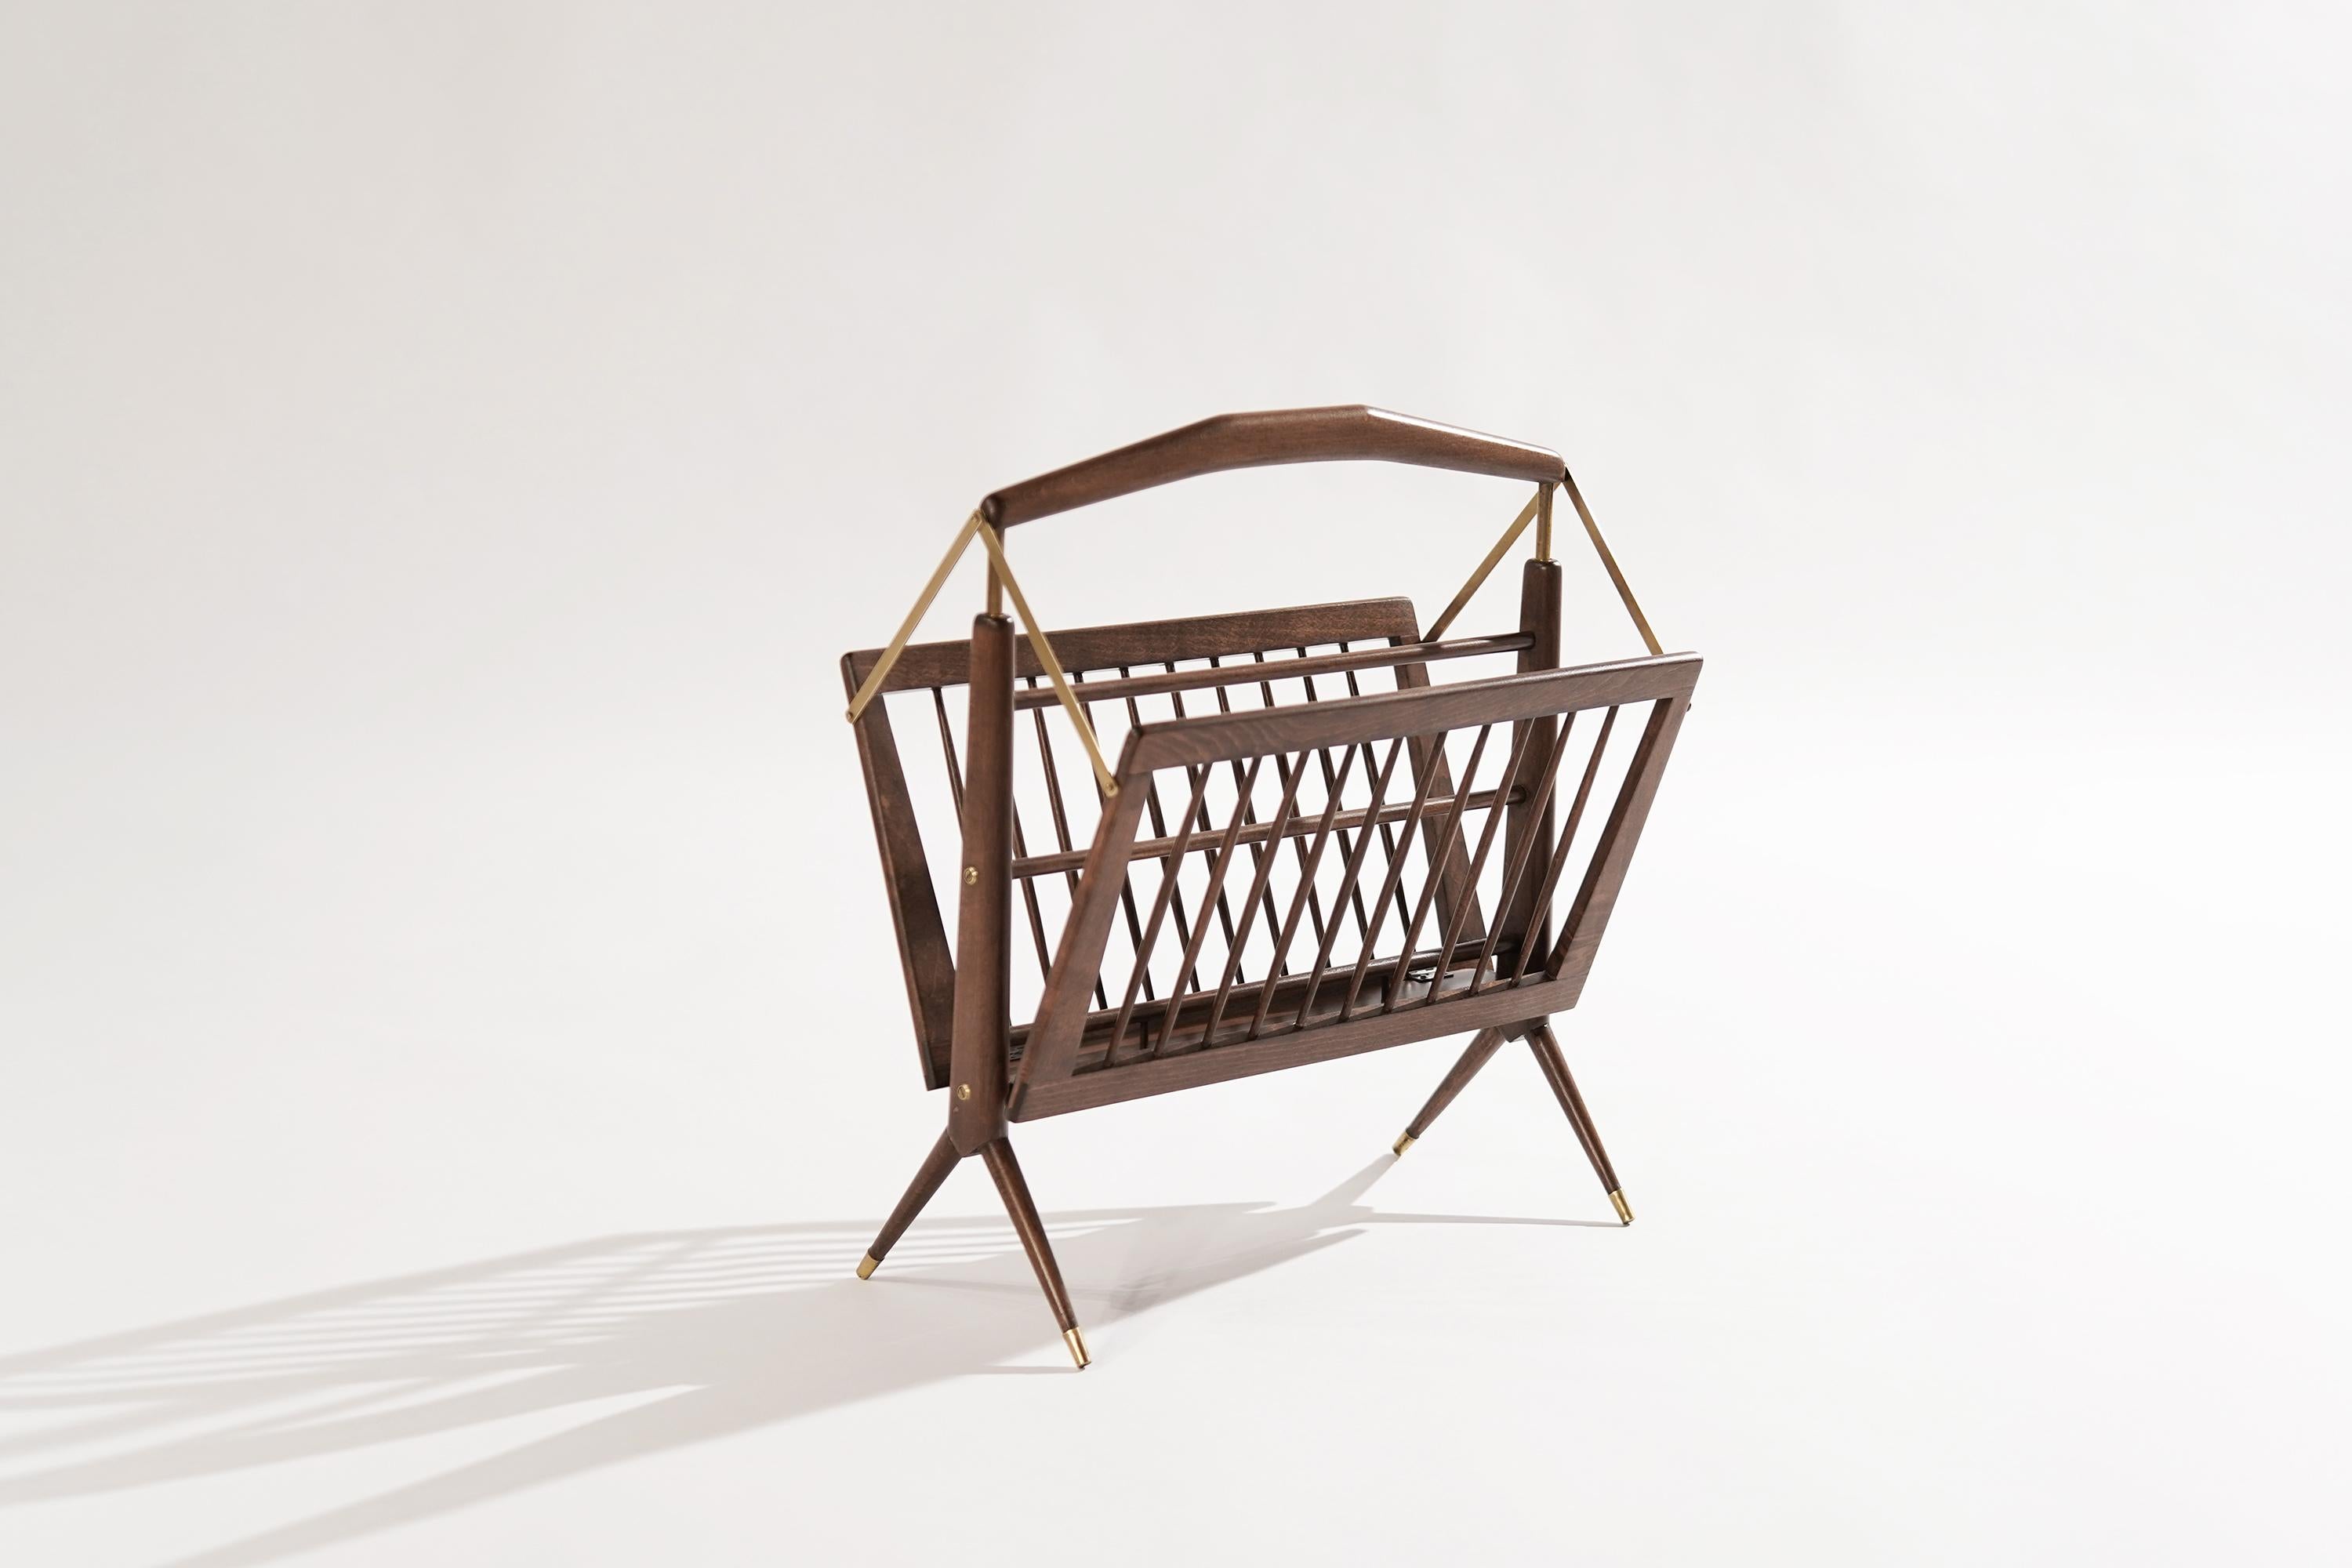 Stunningly beautiful magazine rack or stand in the style of Gio Ponti, featuring a walnut frame with brass accents. Original from Italy, circa 1950-1959.

Other designers working in the organic style include Carlo Mollino, Franco Campo & Carlo